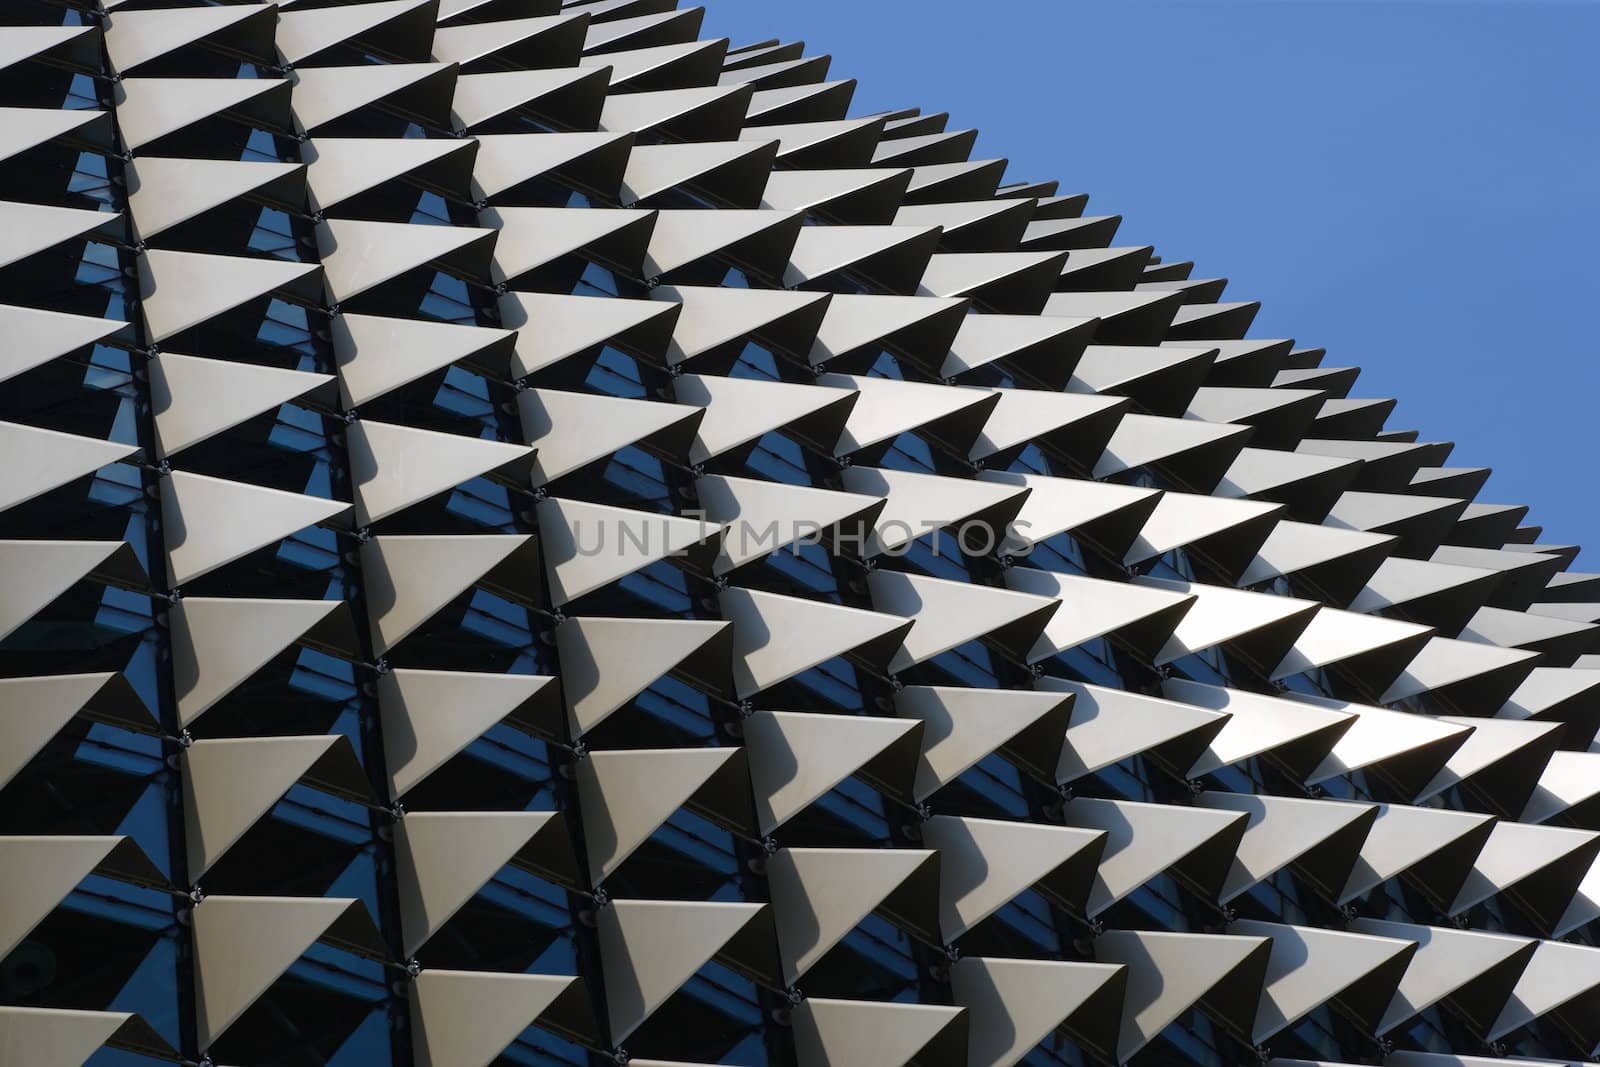 The roof of the Esplanade theatre in Singapore. Designed to resemble the durian fruit.
